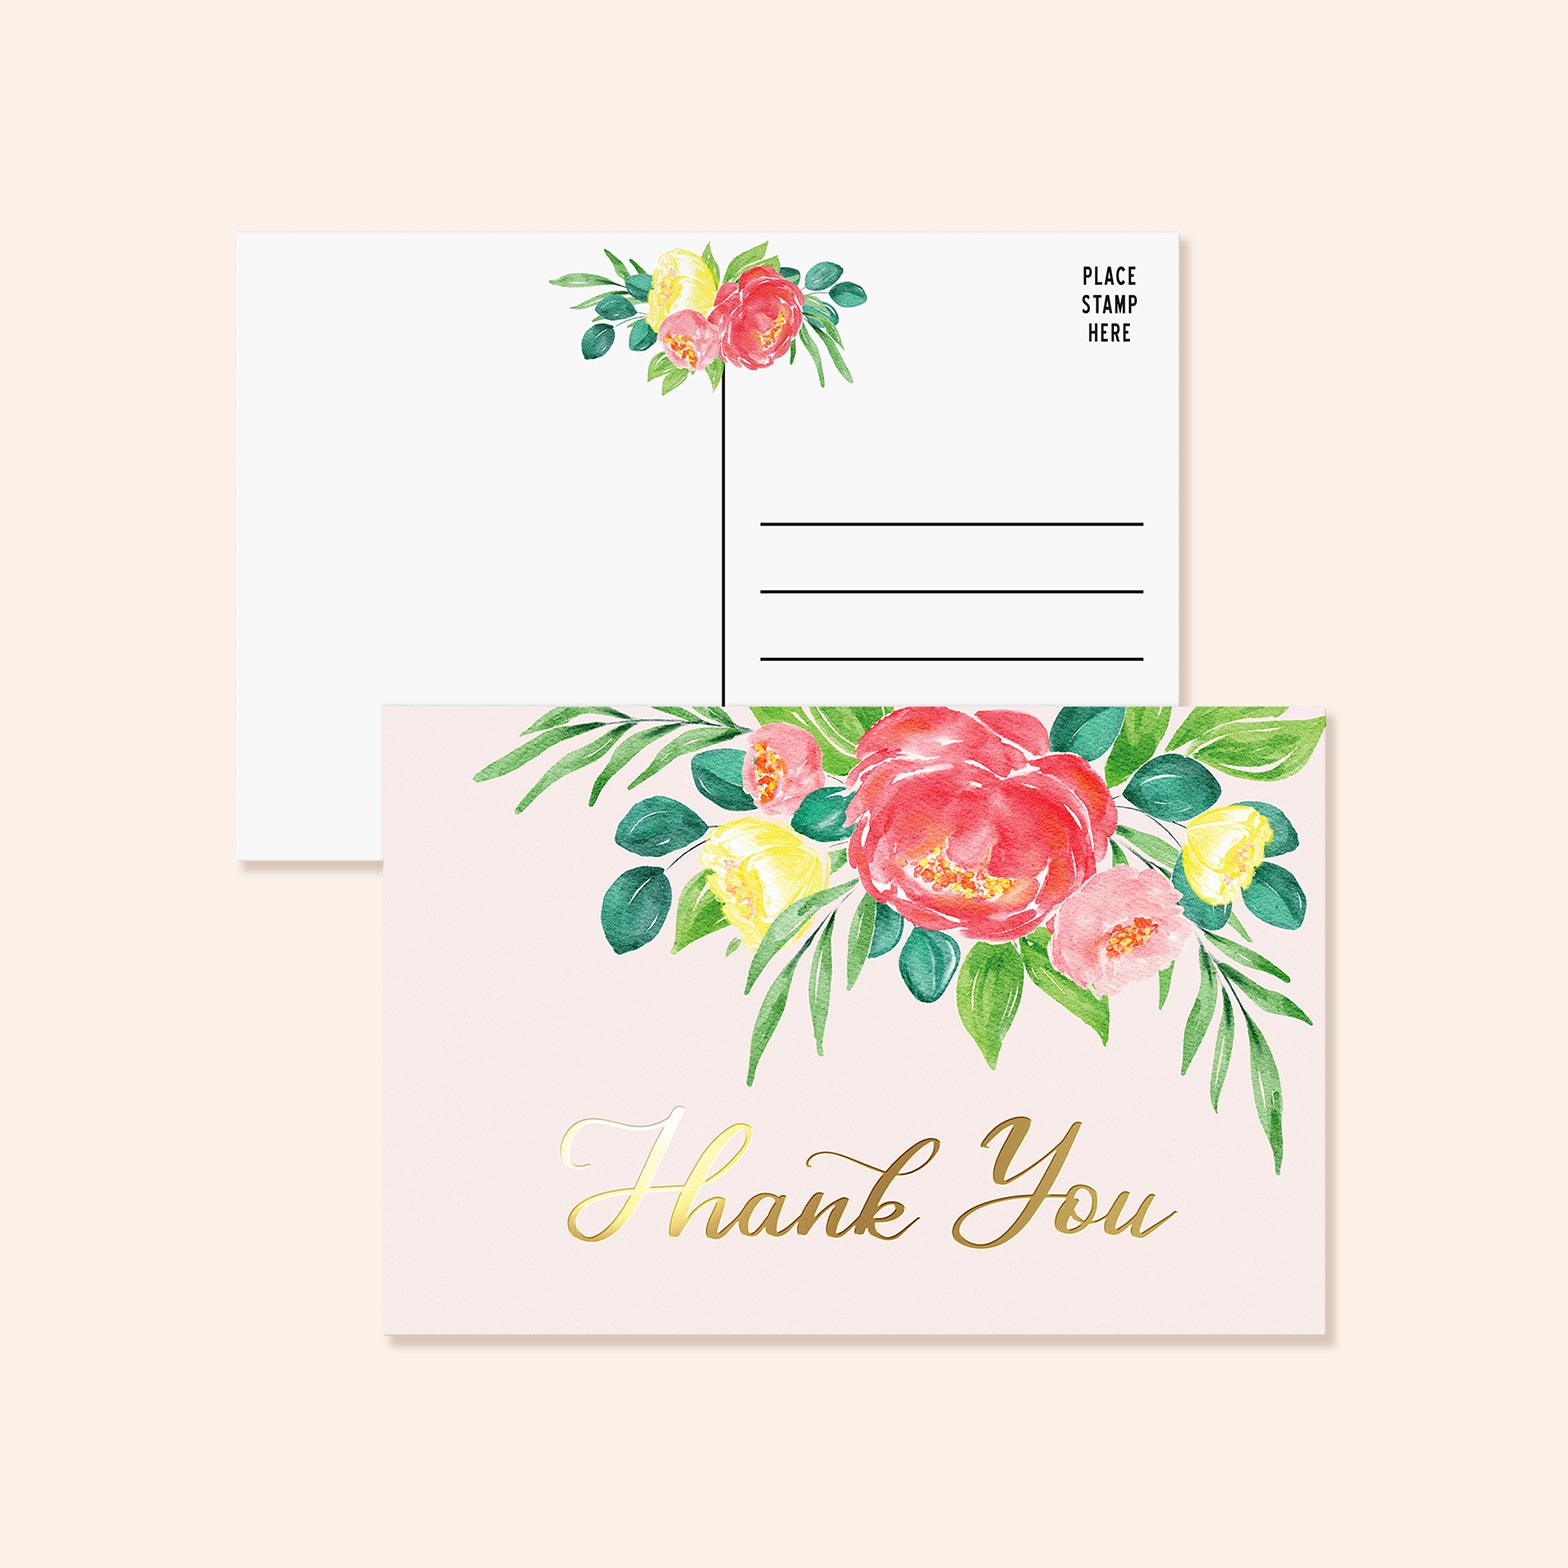 Sweetzer & Orange 4x6 Recipe Cards. Set of 50x Floral, Blank Recipe Cards  4x6 Inches Double Sided. Large Recipe Index Card Fits Standard 4x6 Recipe  Box.